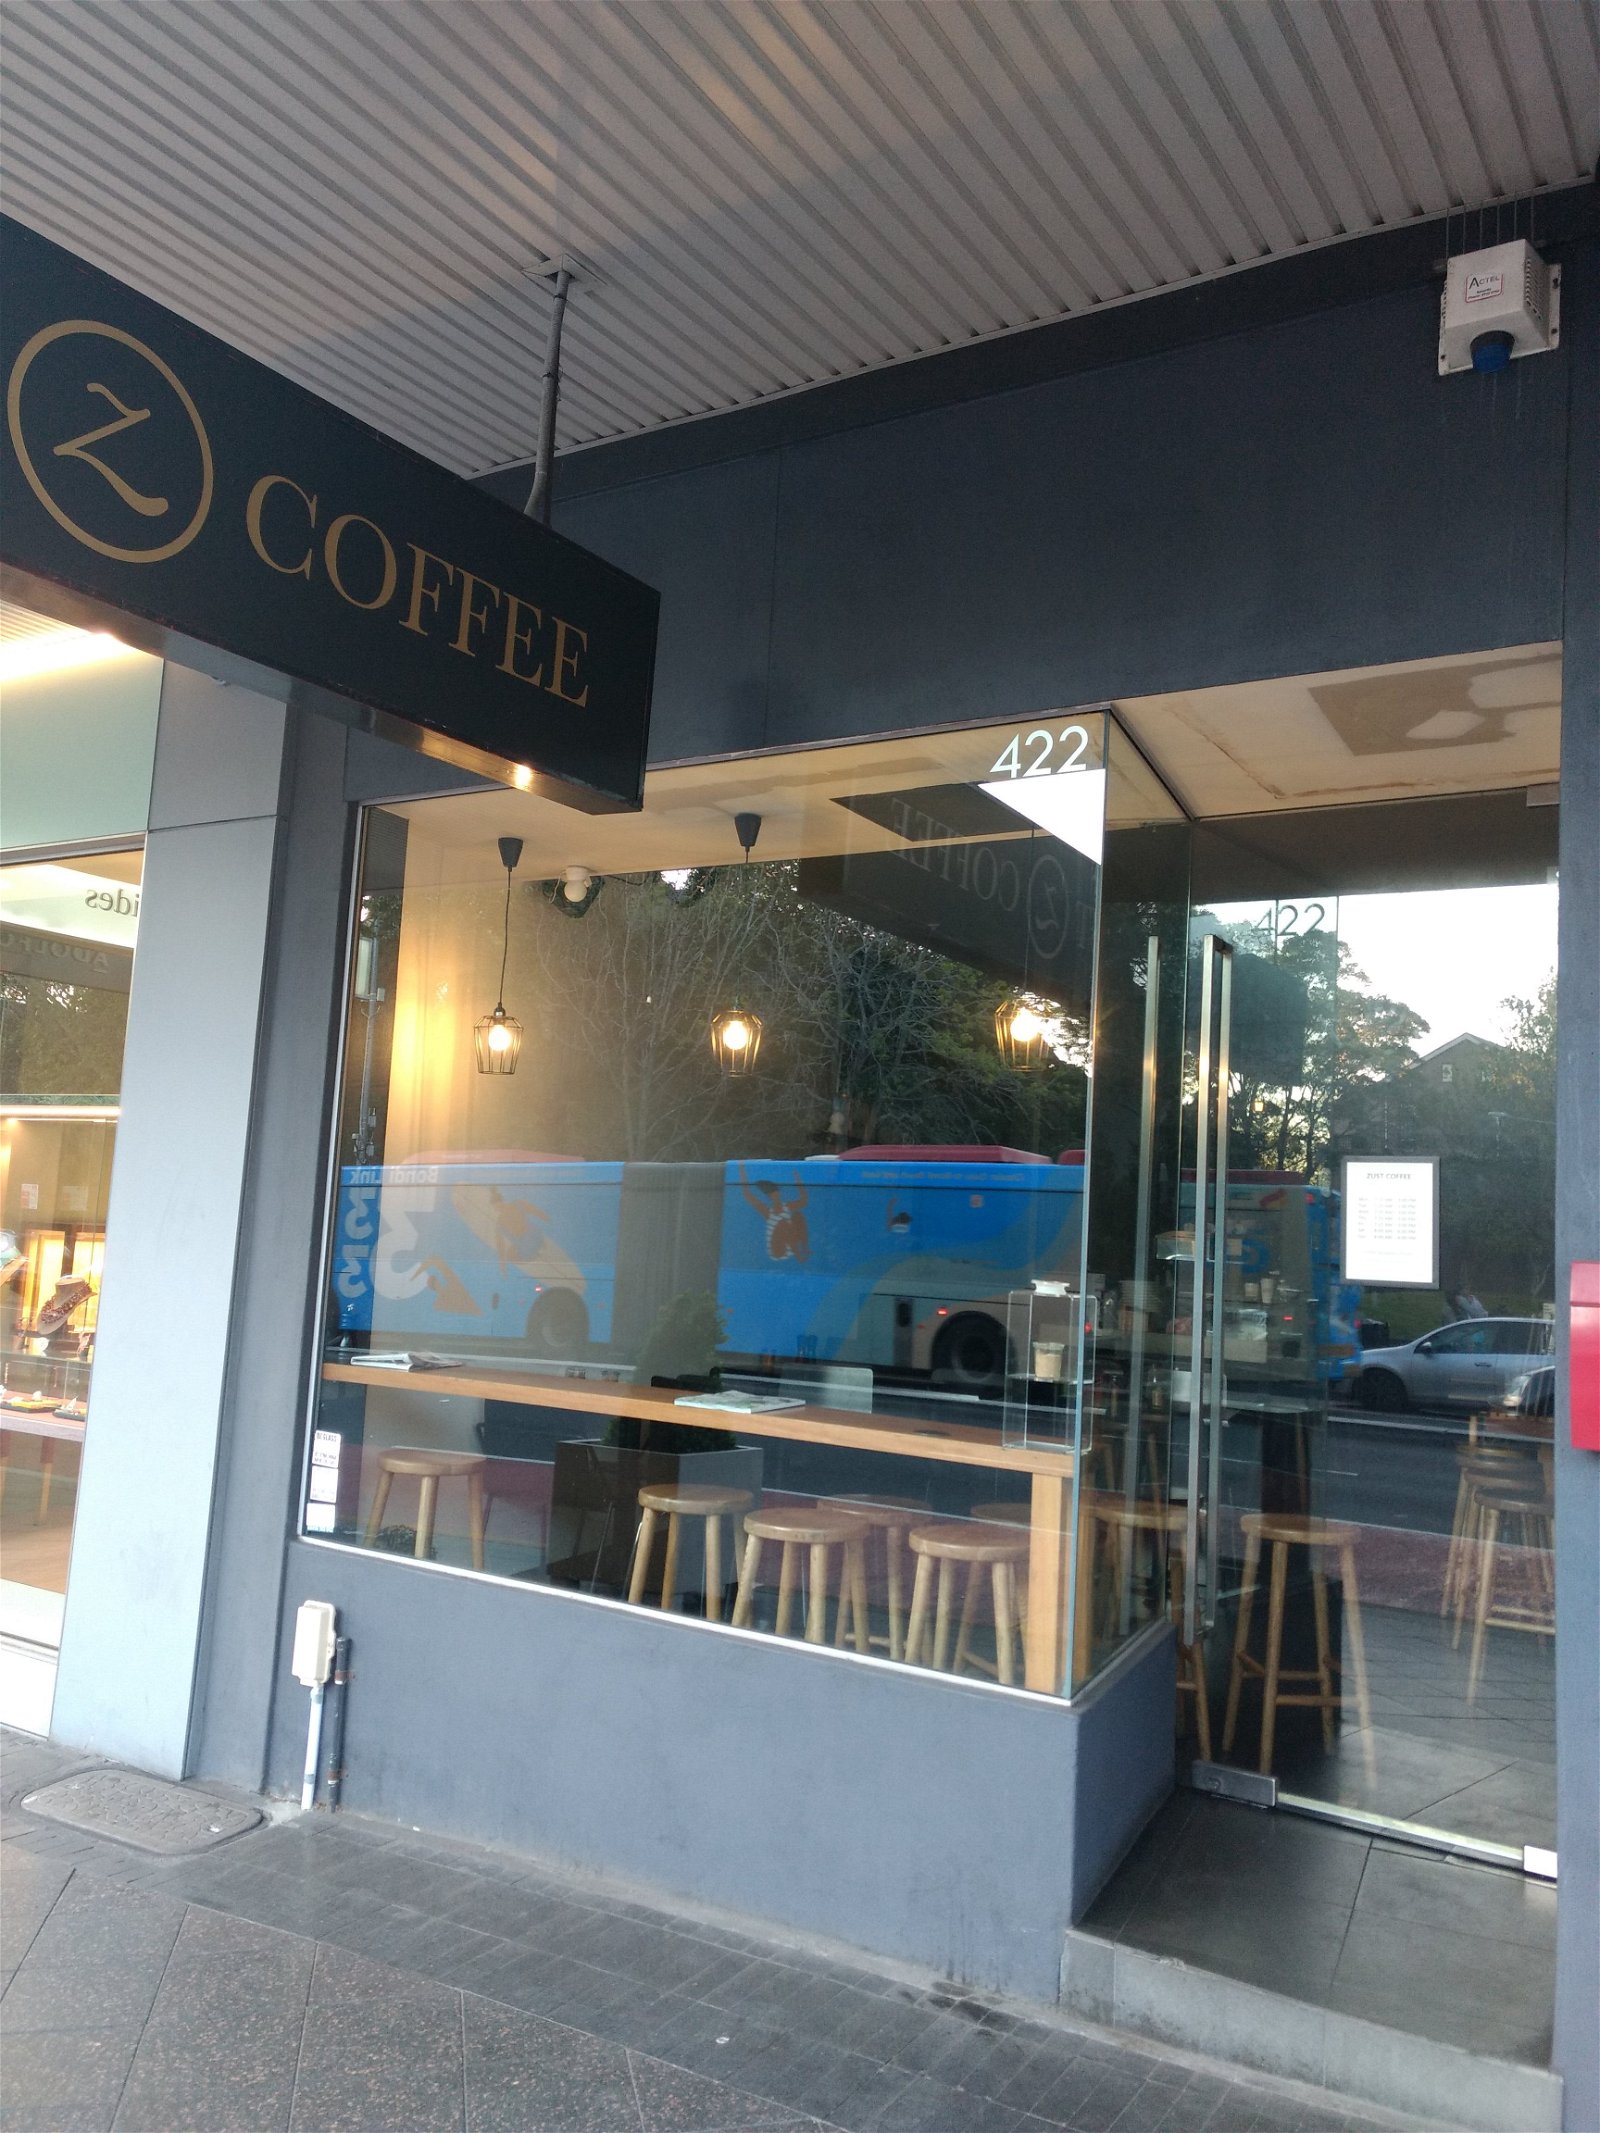 Zust coffee - Northern Rivers Accommodation